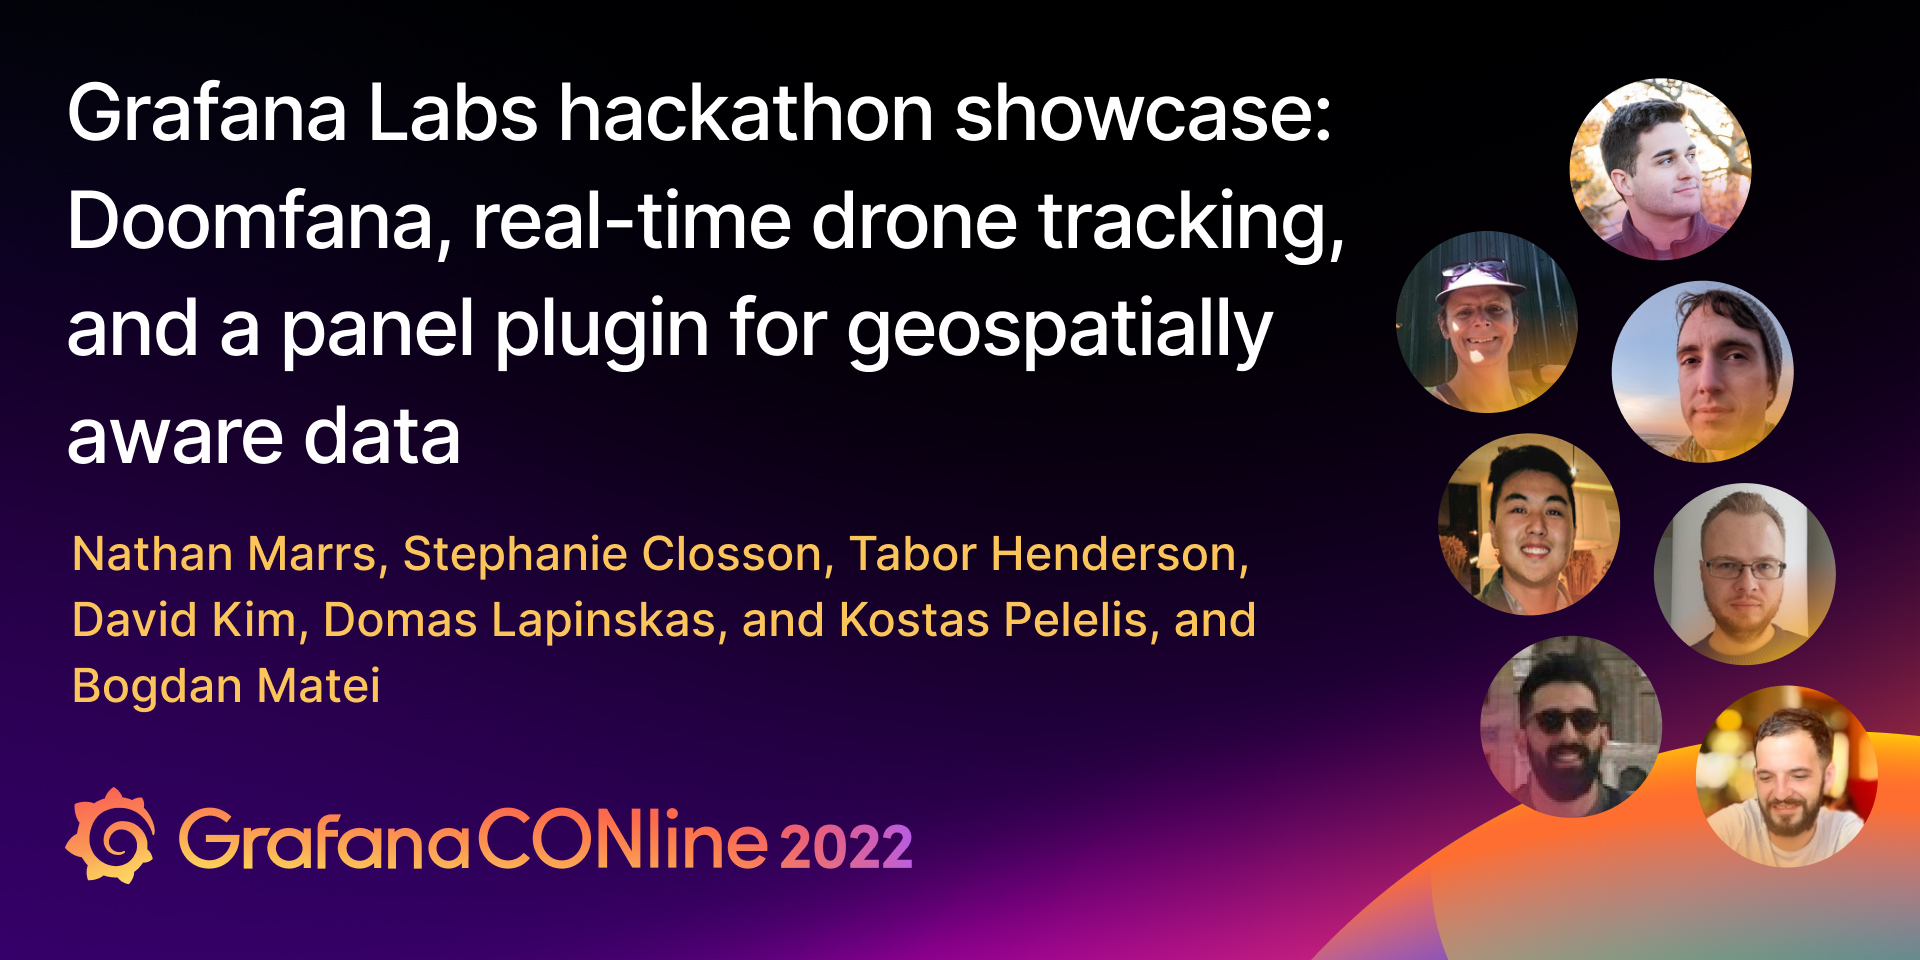 Grafana Labs hackathon showcase: Doomfana, real-time drone tracking, and a panel plugin for geospatially aware data